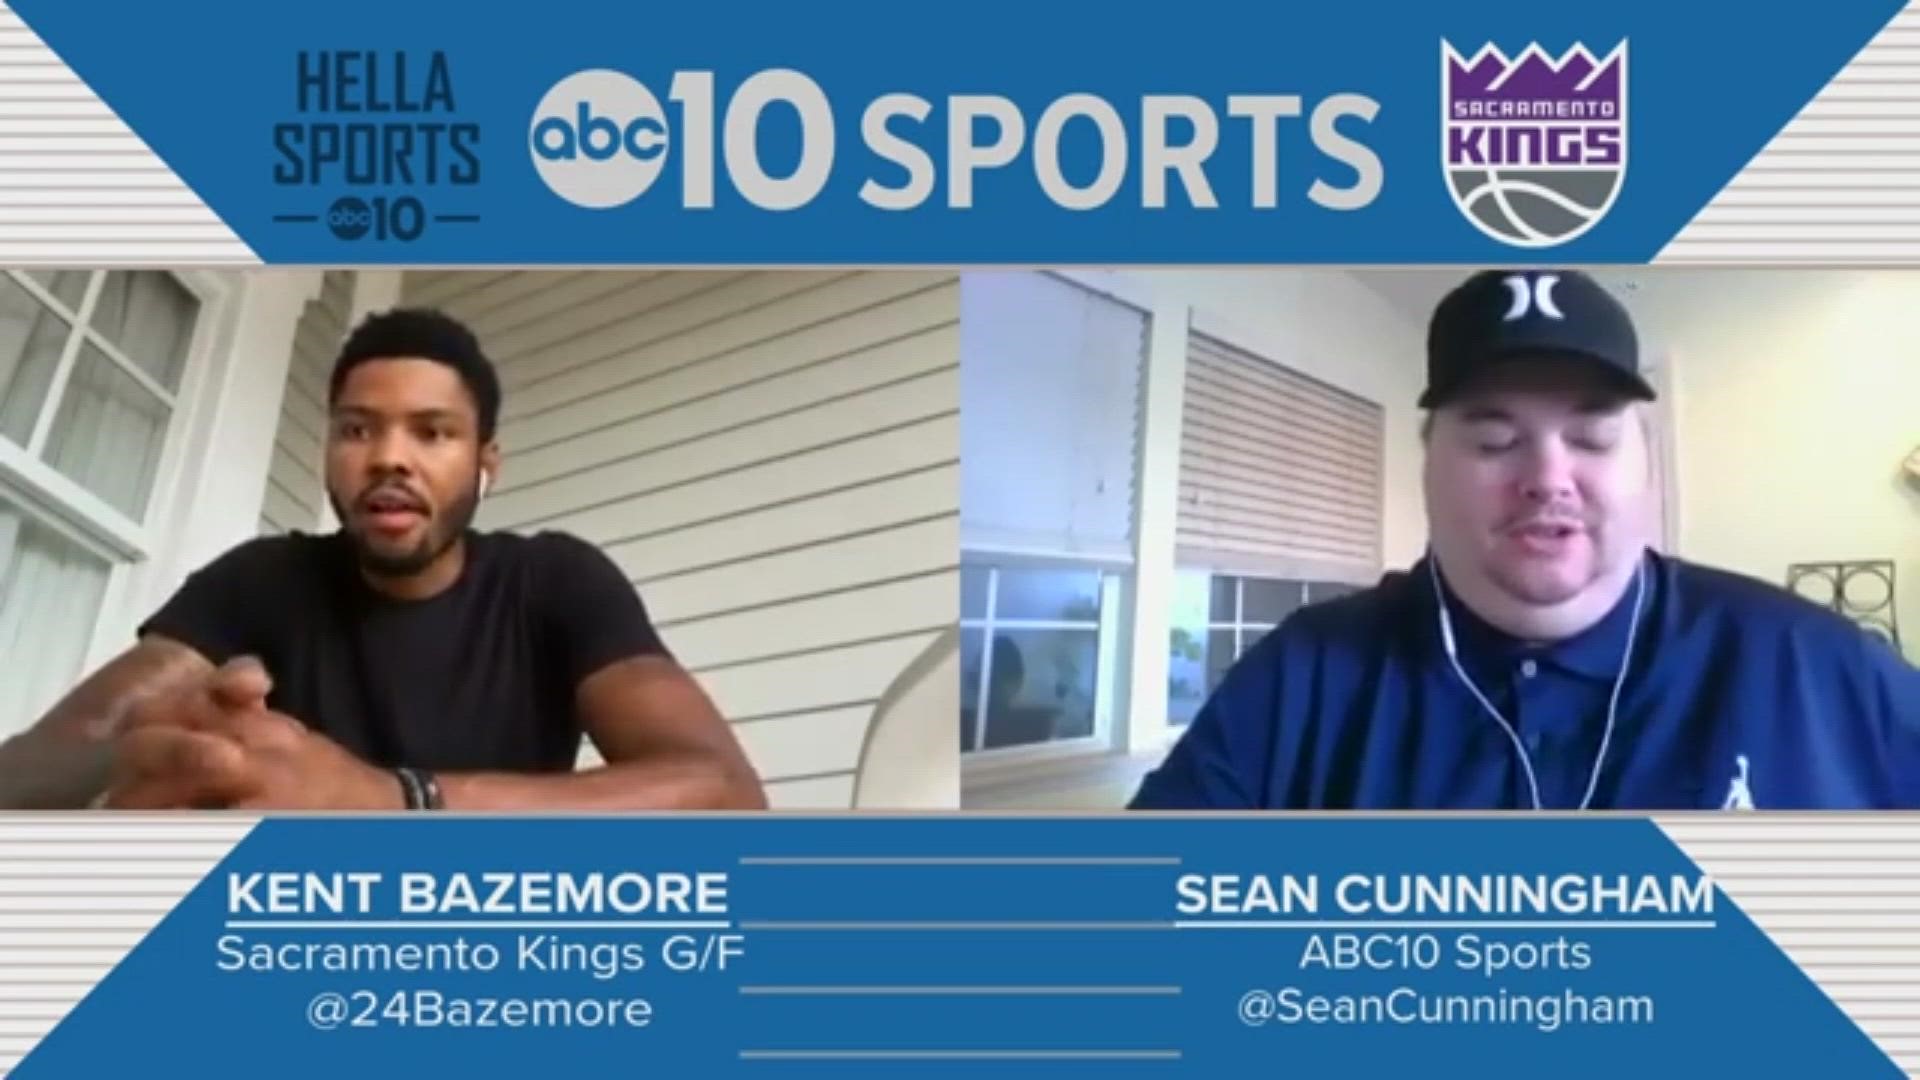 Kings G/F Kent Bazemore joins ABC10's Sean Cunningham from Orlando on Thursday, the eve before the NBA season restart to discuss their game against the Spurs & more.